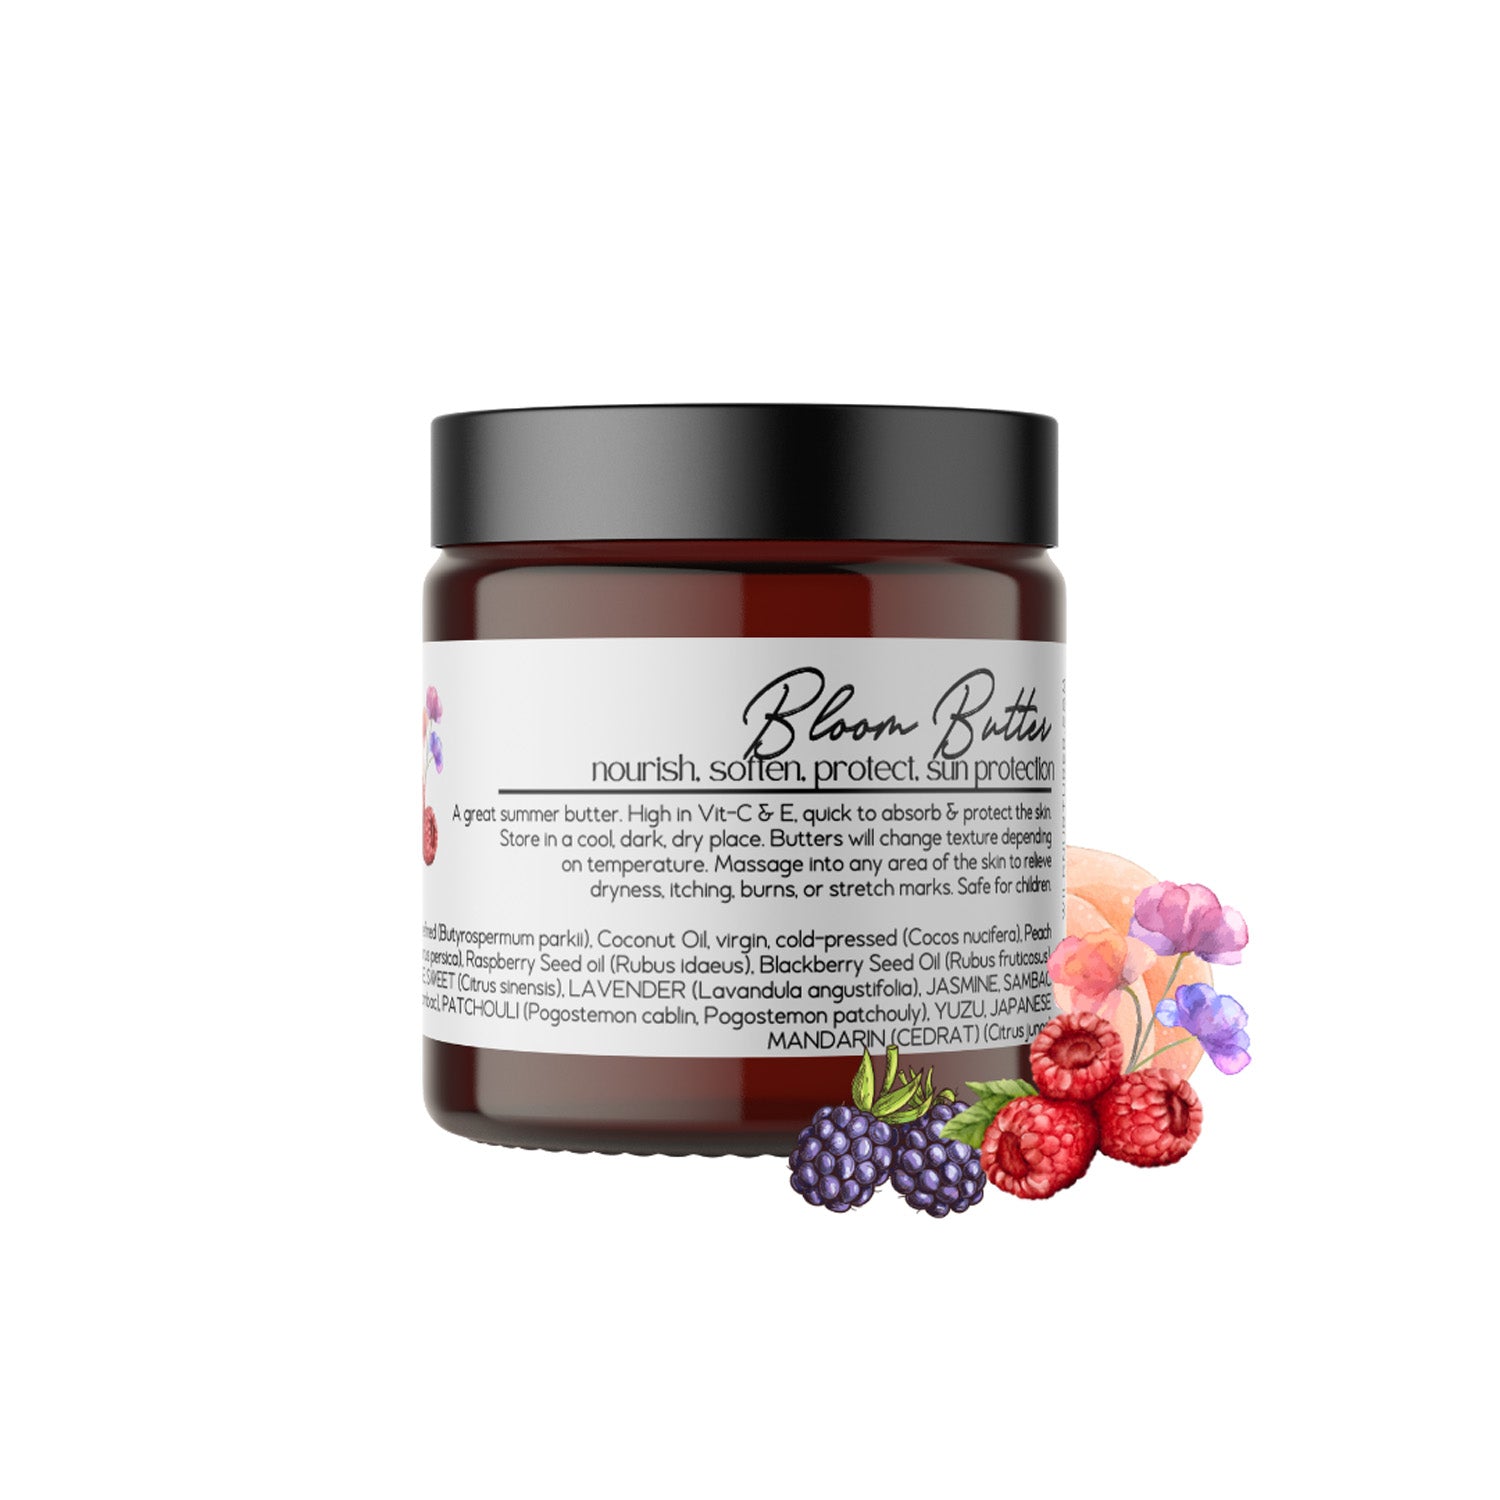 A jar of Bloom - 4oz Whipped Body & Feet Skin Repair Butter by Wild Nurturer Aromatherapy, with essential oil, illustrated berries, and ingredients listed on the label.